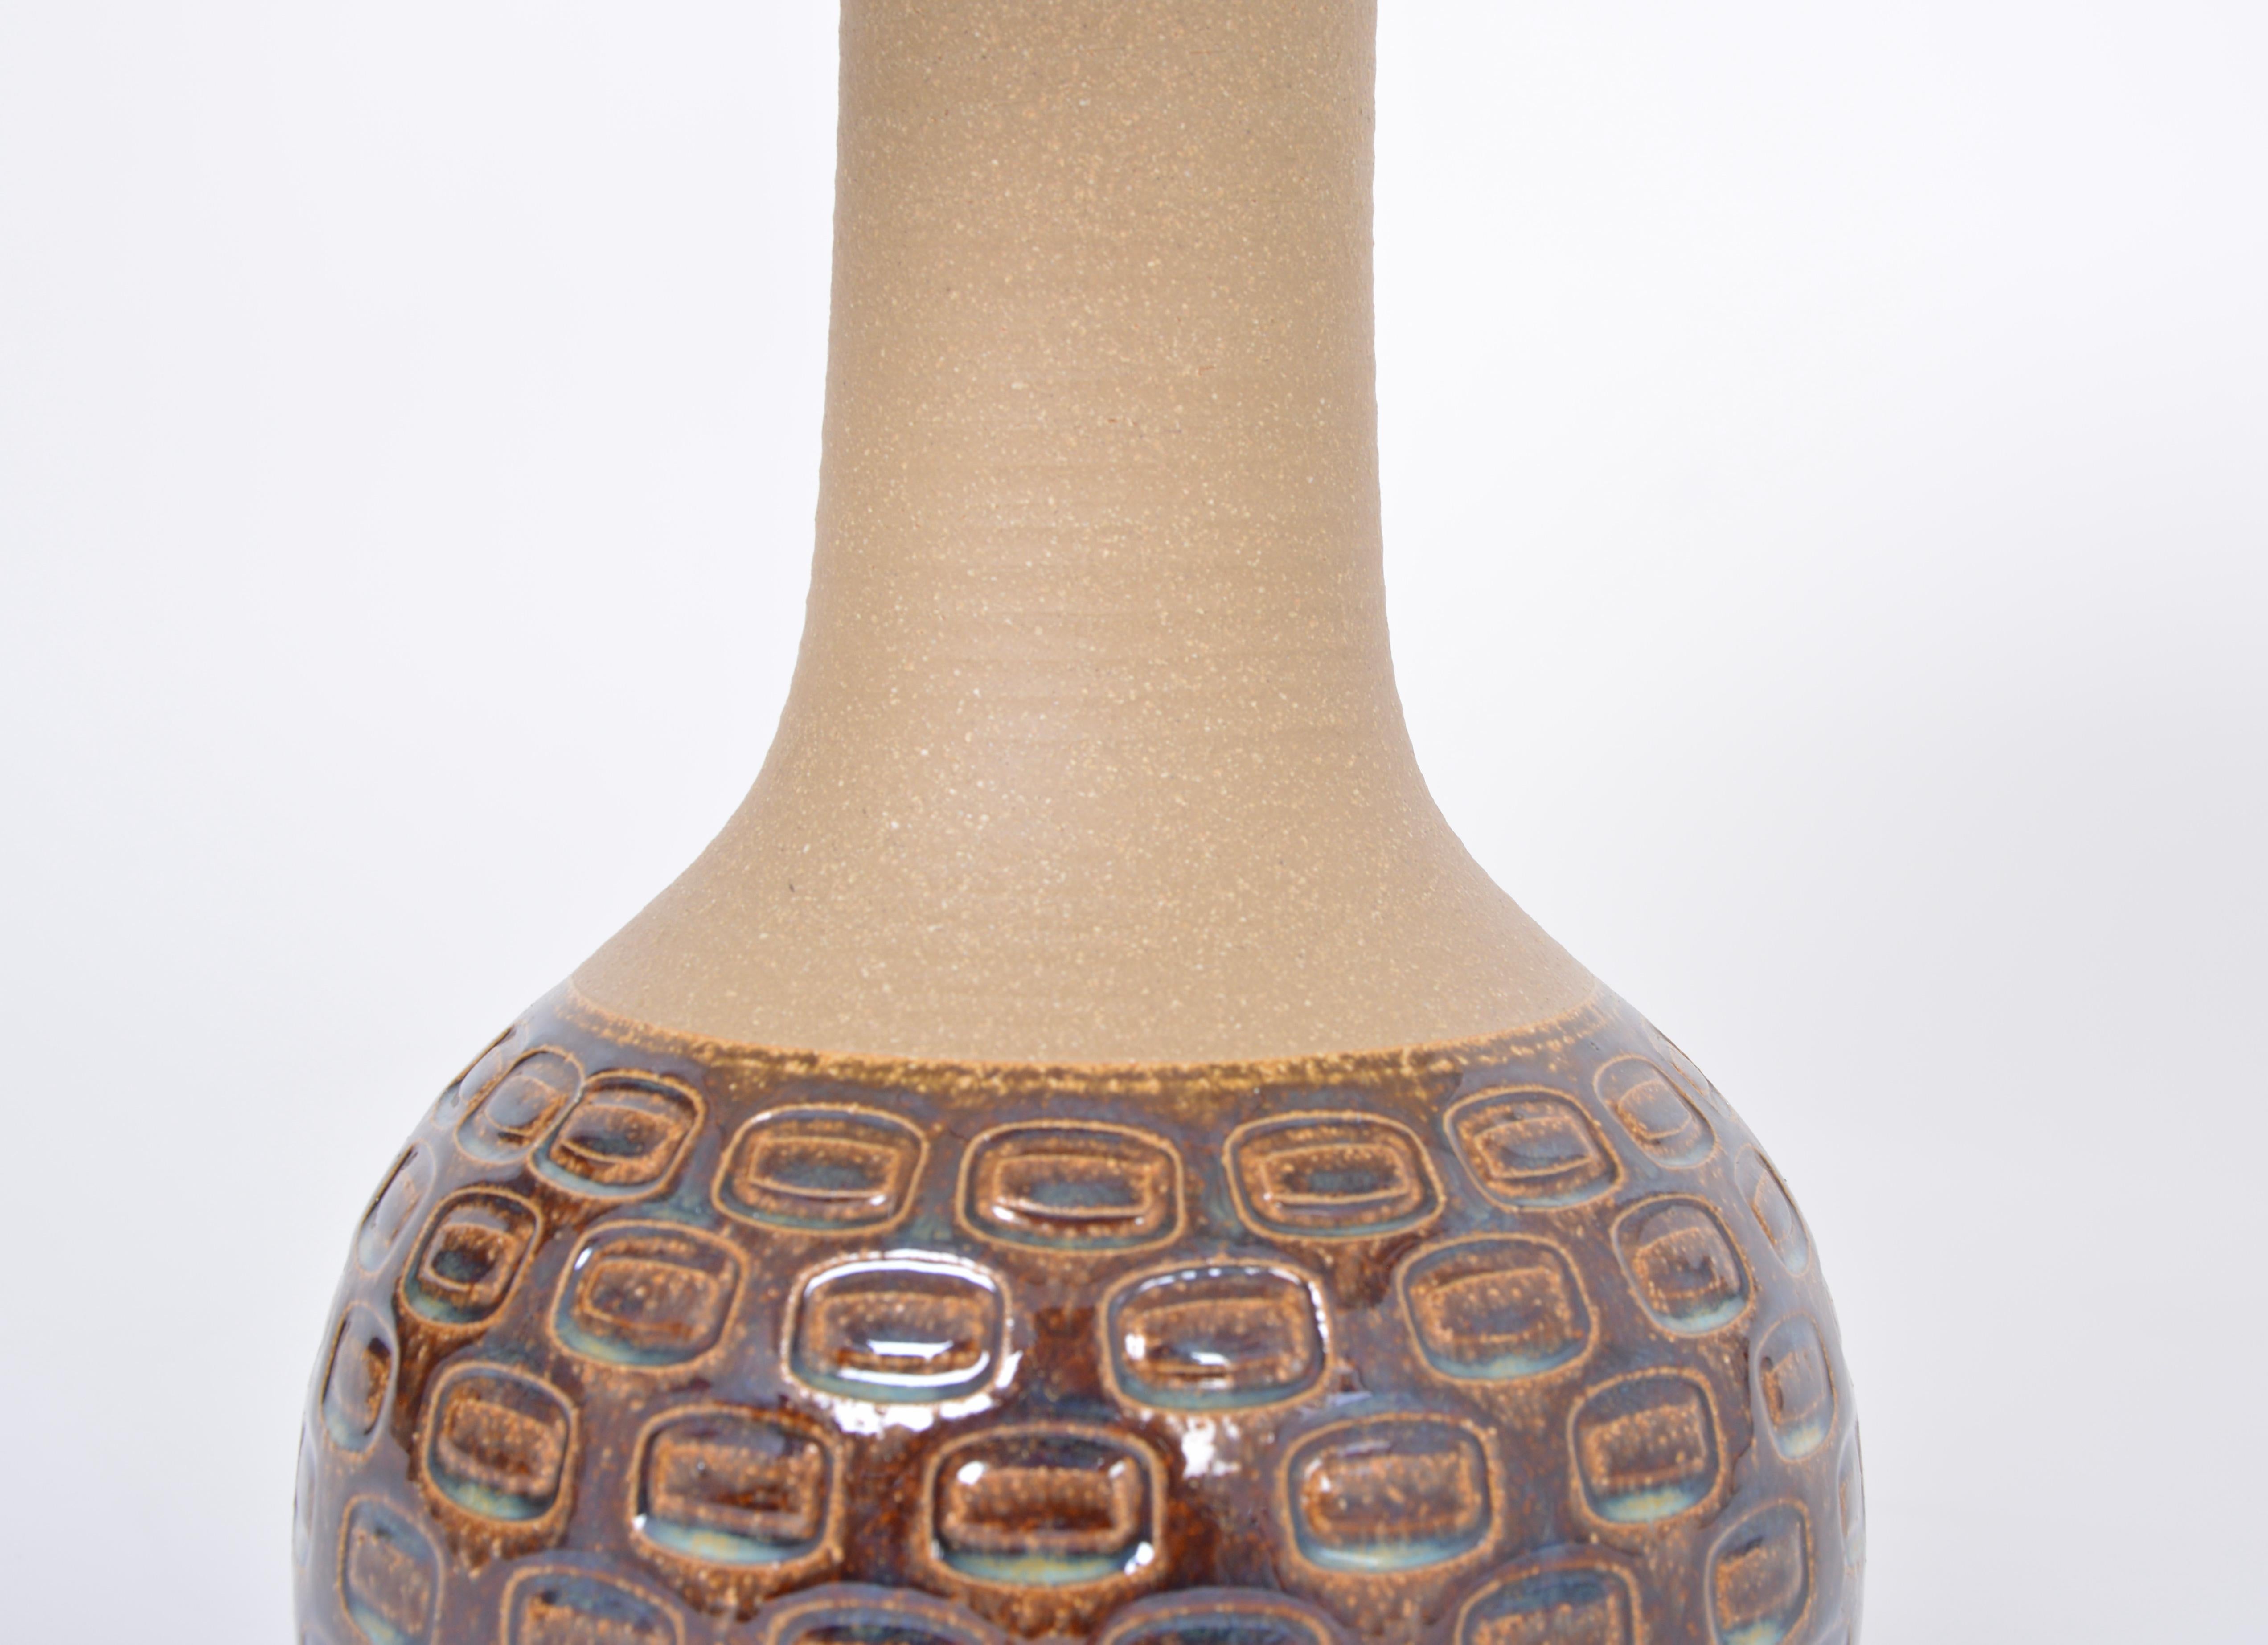 Handmade Danish Mid-Century Modern Stoneware Lamp with Graphic Pattern by Soholm For Sale 2